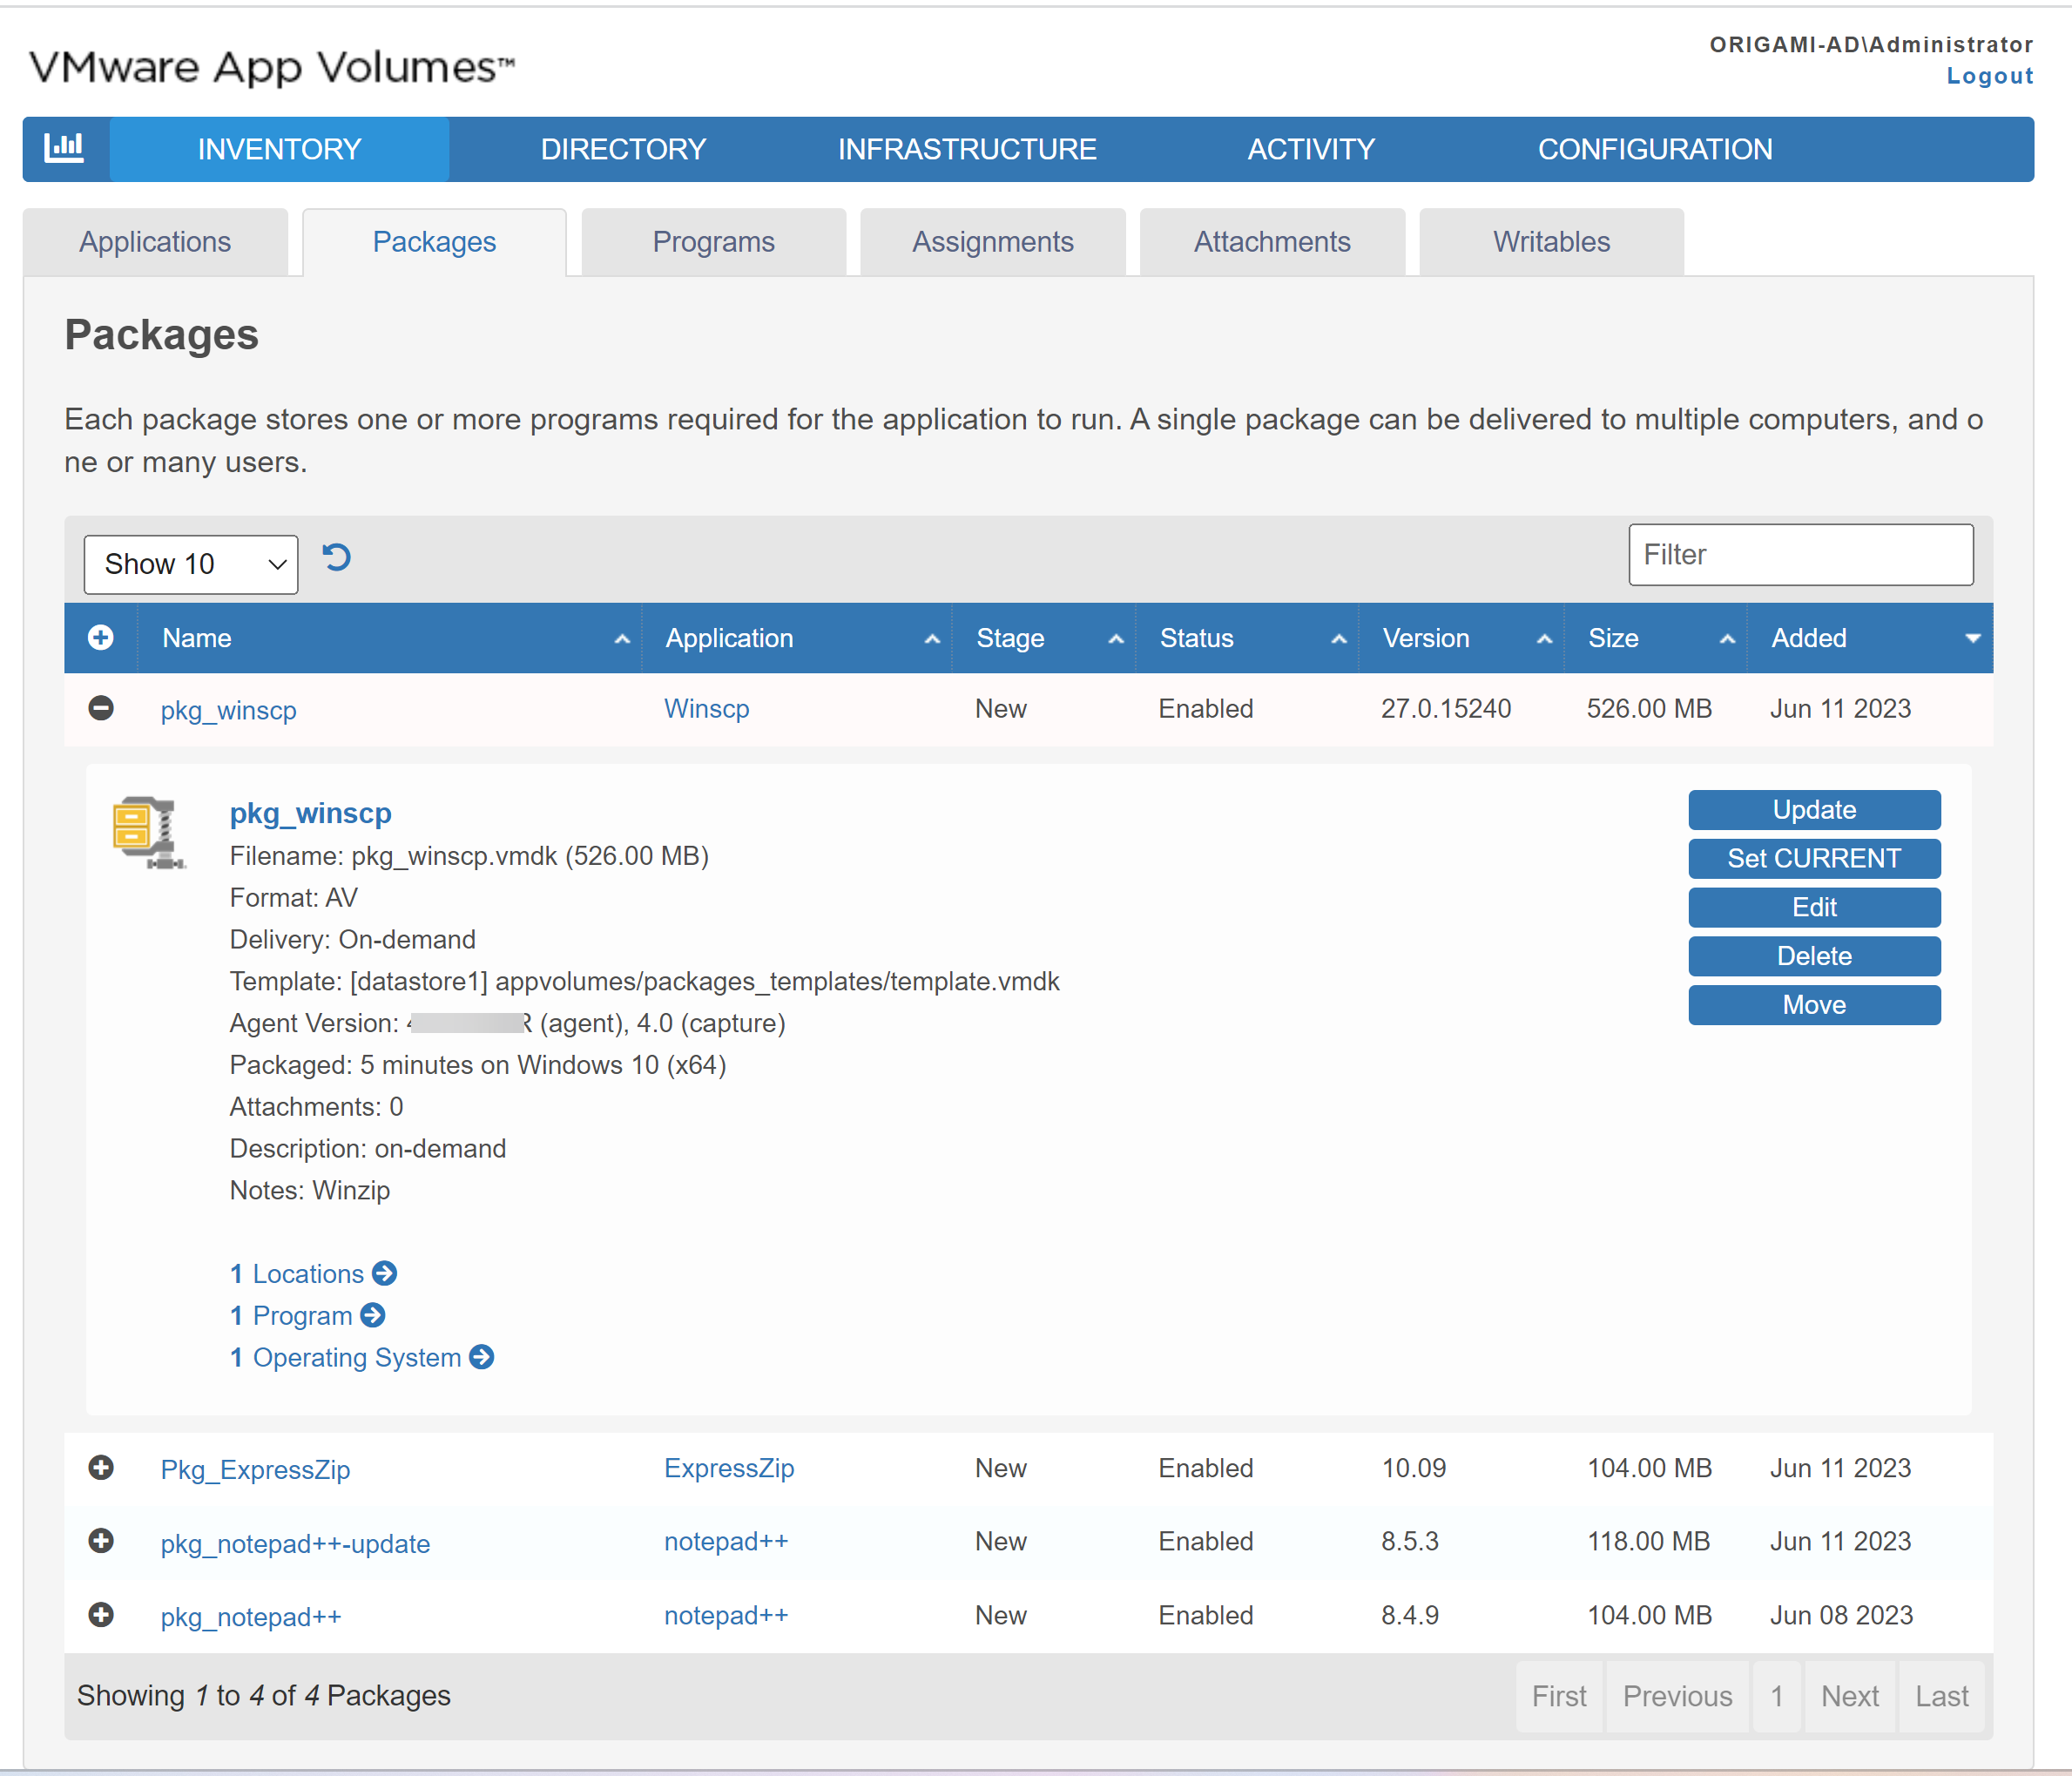 Packages summary page lists all the packages created for all applications in App Volumes and displays the information summary for each package.